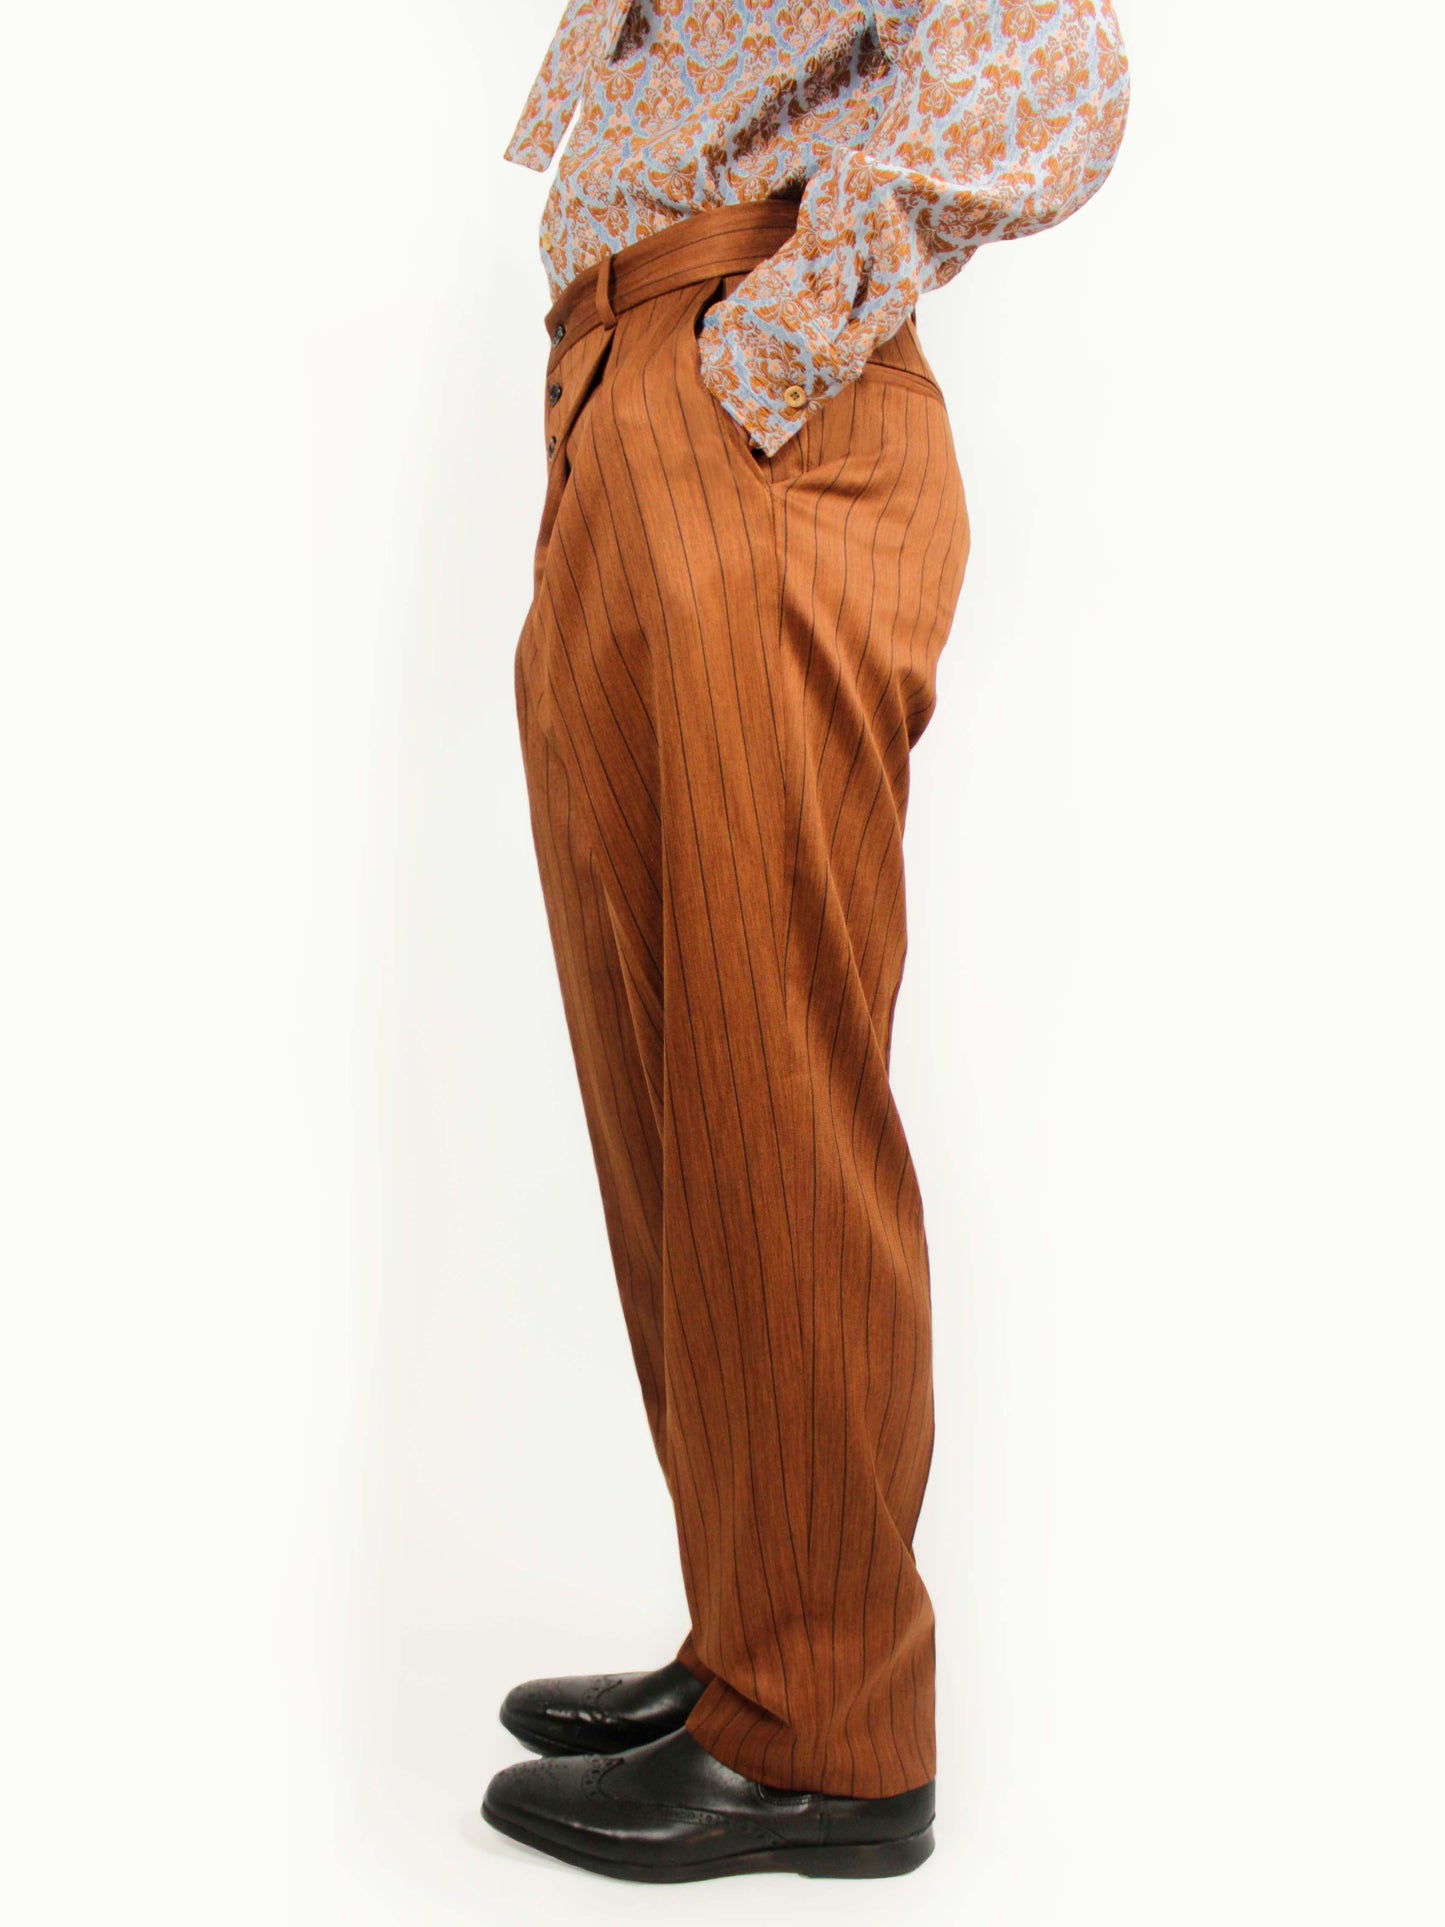 Classic Brown Trousers Unisex